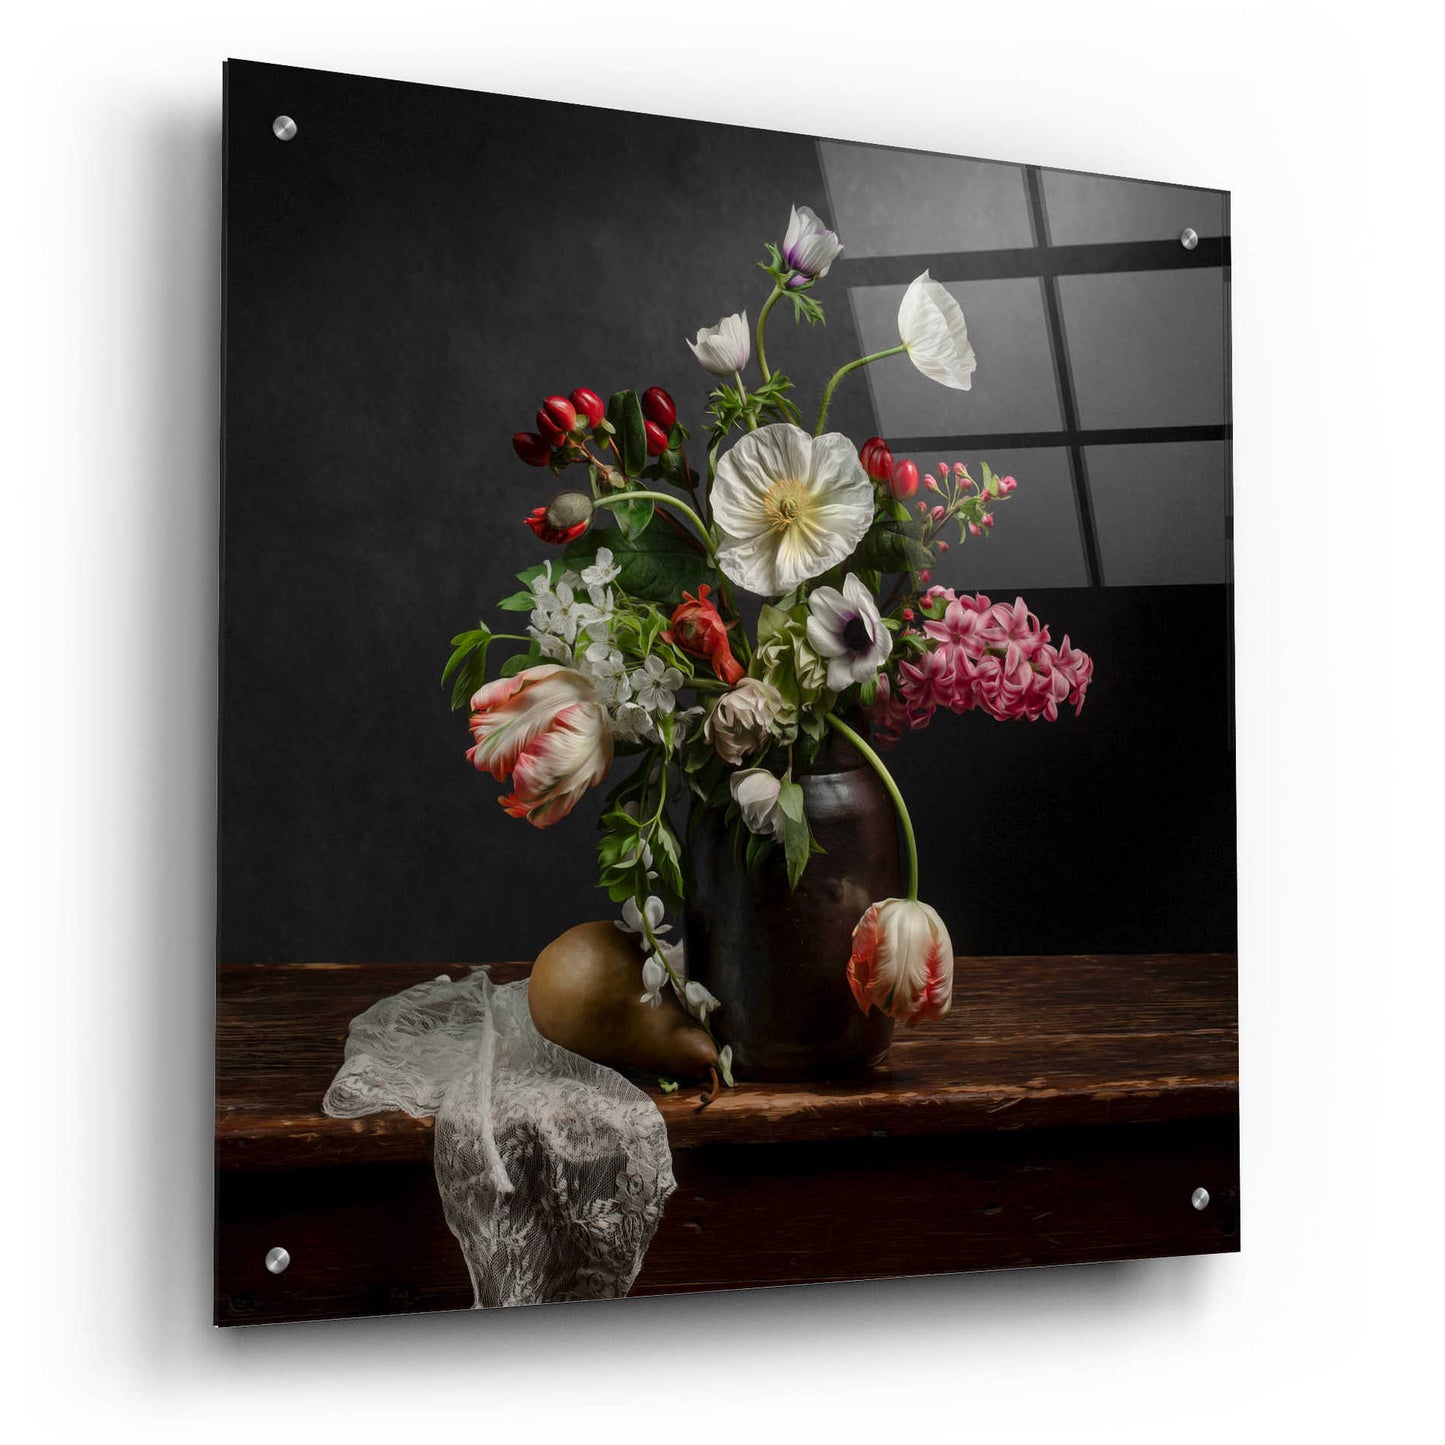 Epic Art 'Pear And Parrot Tulip Still Life' by Leah McLean Acrylic Glass Wall Art,24x24